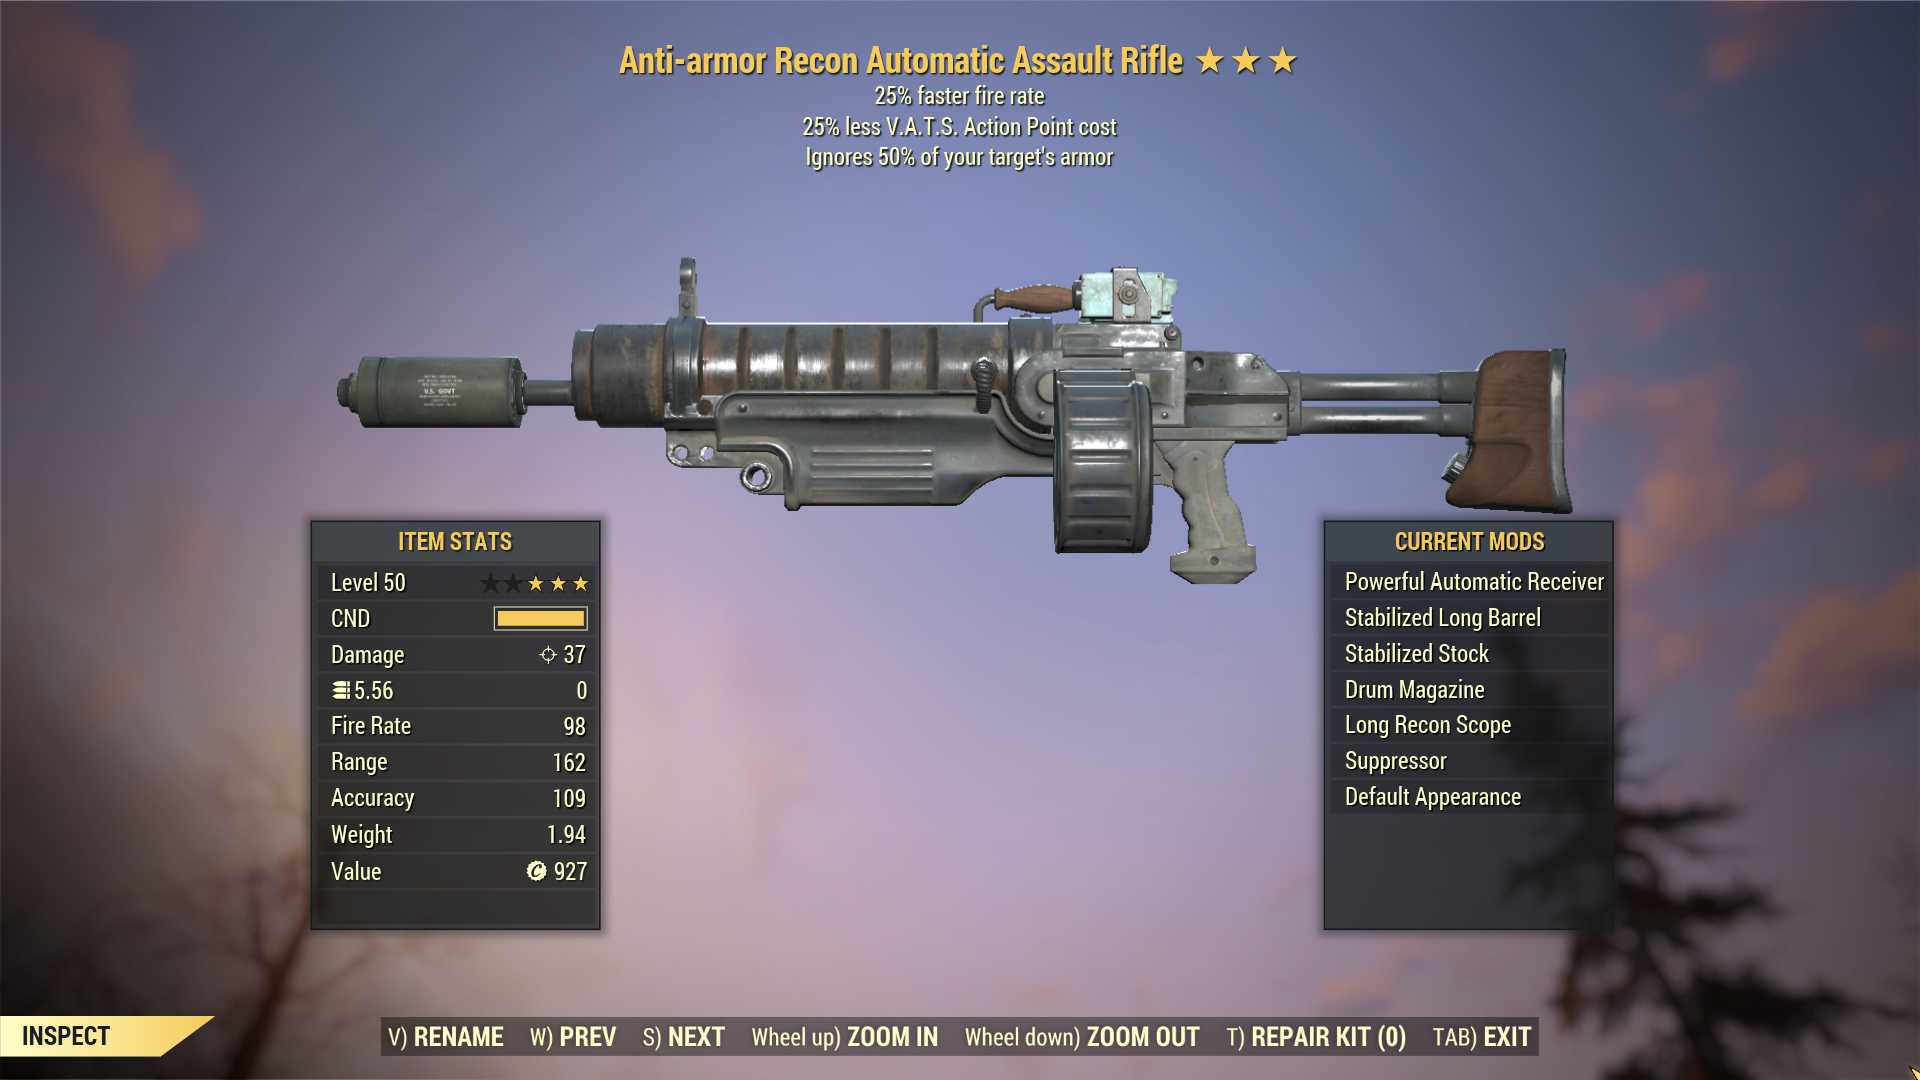 Anti-Armor Assault Rifle (25% faster fire rate, 25% less VATS AP cost)